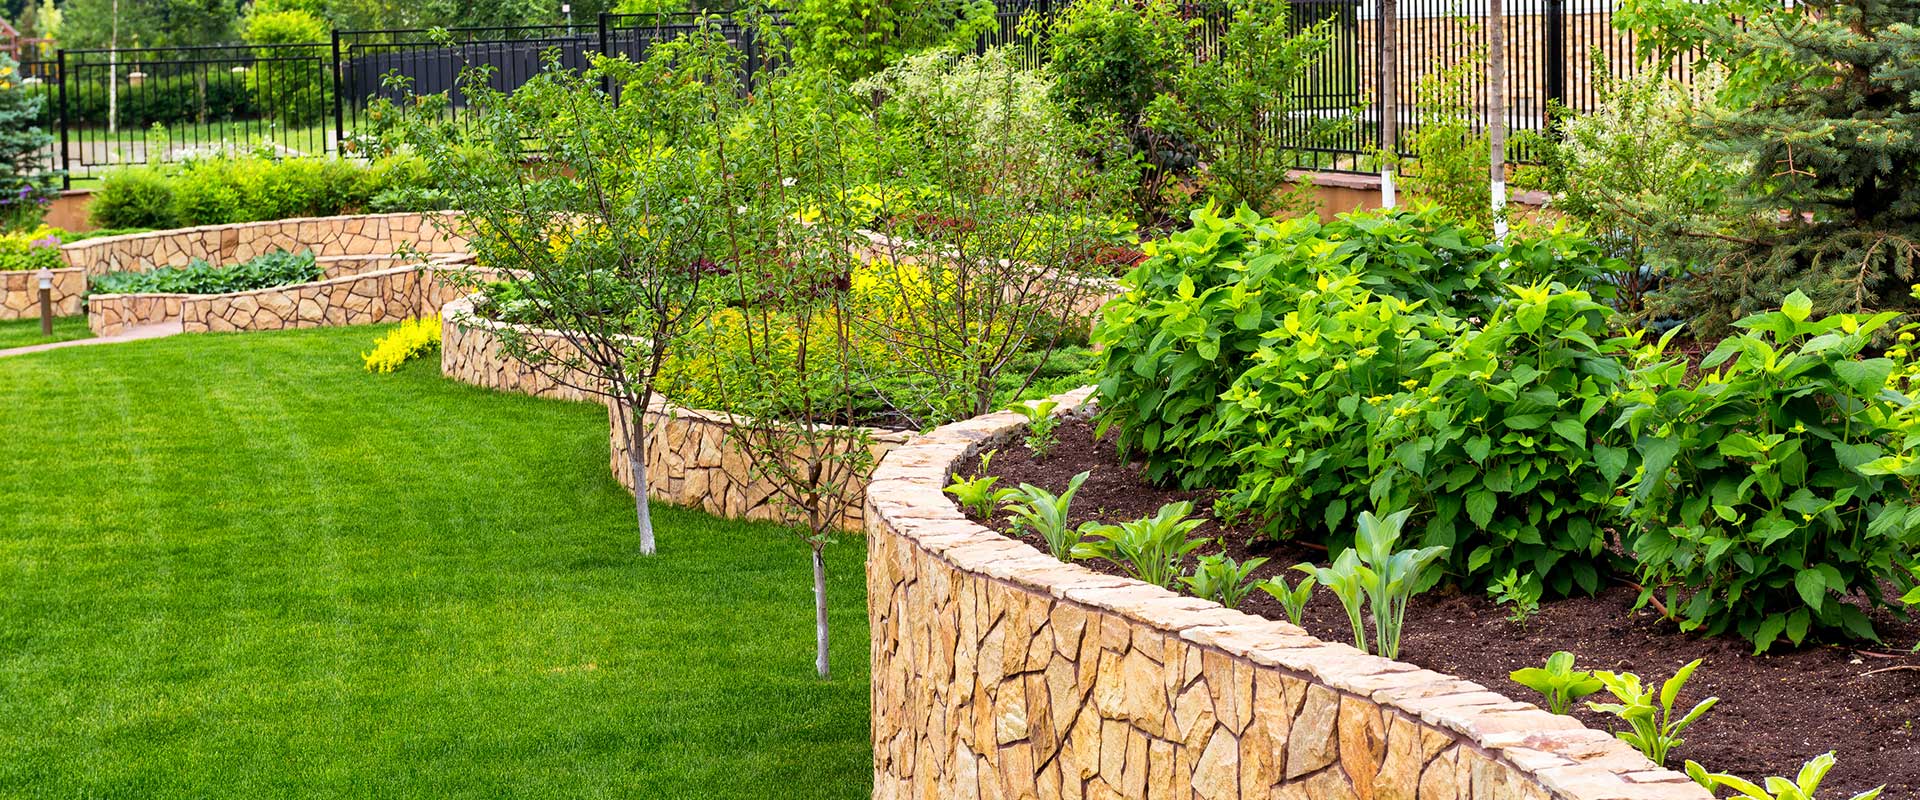 Jf Landscaping Charlotte Nc, Landscaping Companies Charlotte Nc